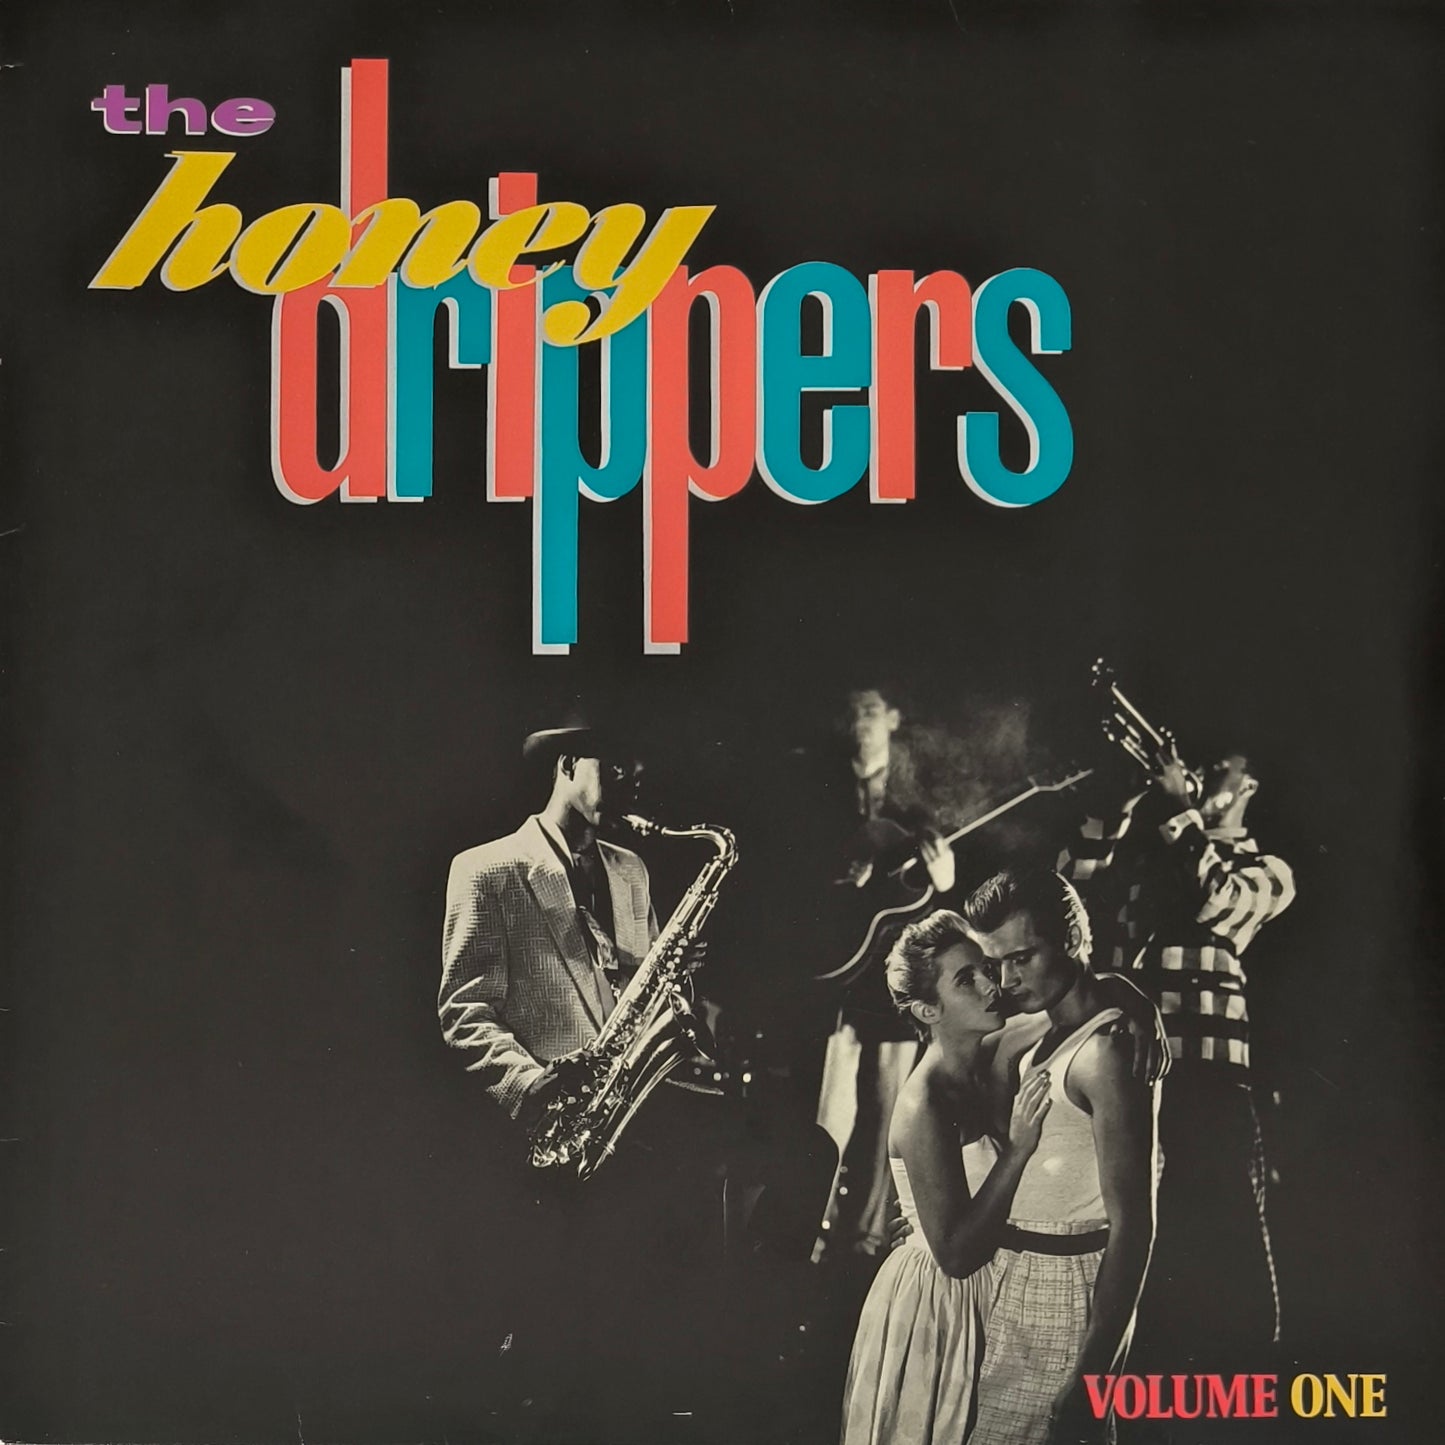 THE HONEYDRIPPERS - Volume One